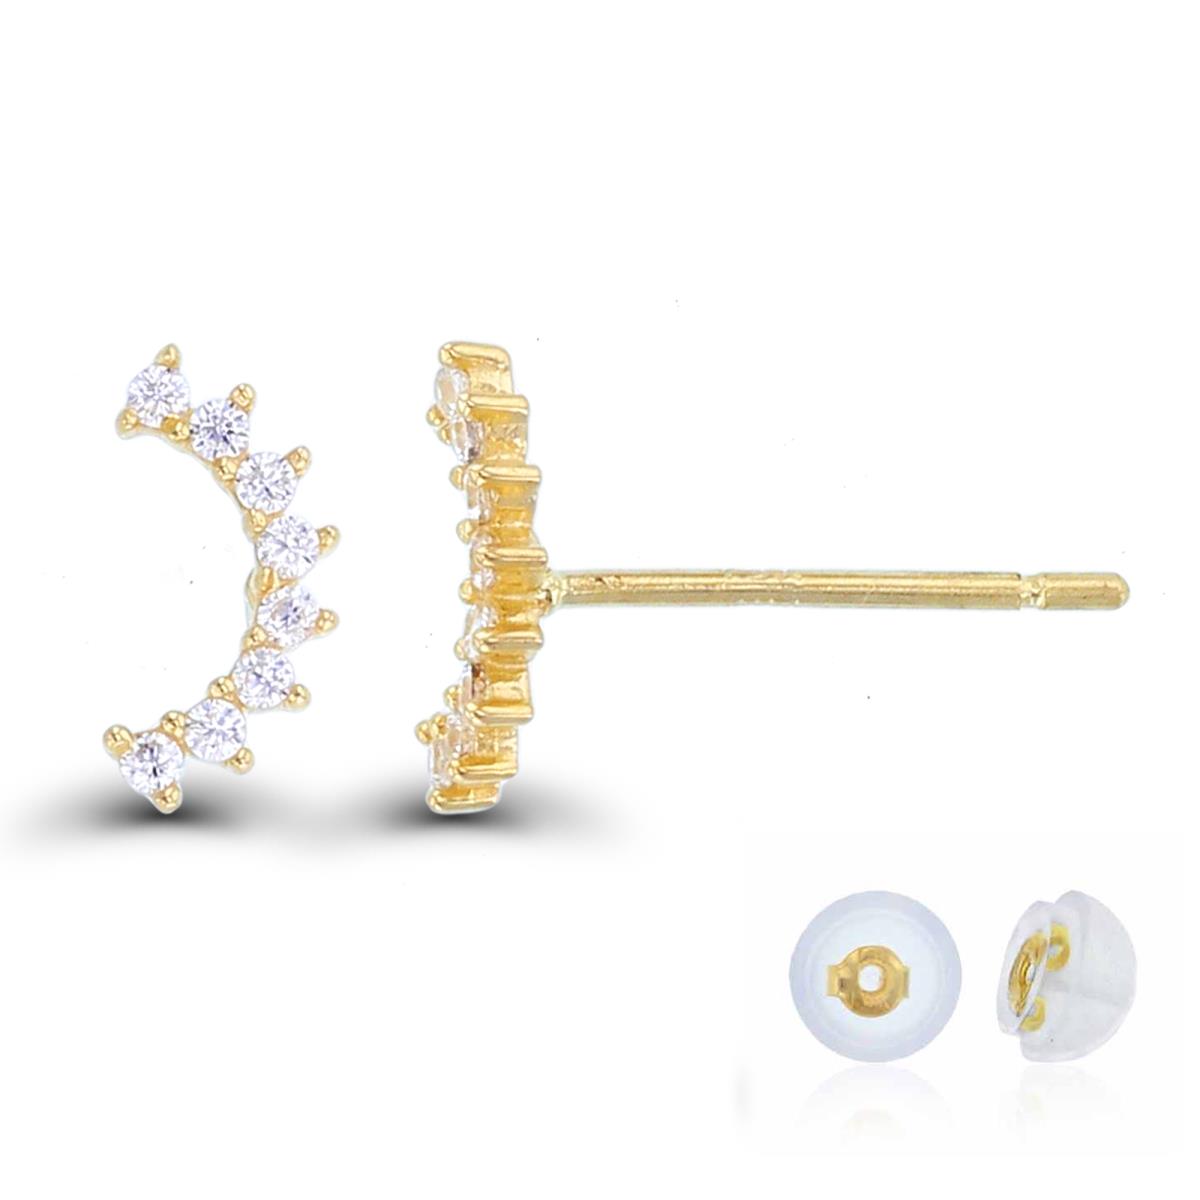 10K Yellow Gold Rnd CZ Crescent Moon Studs with Silicon Backs